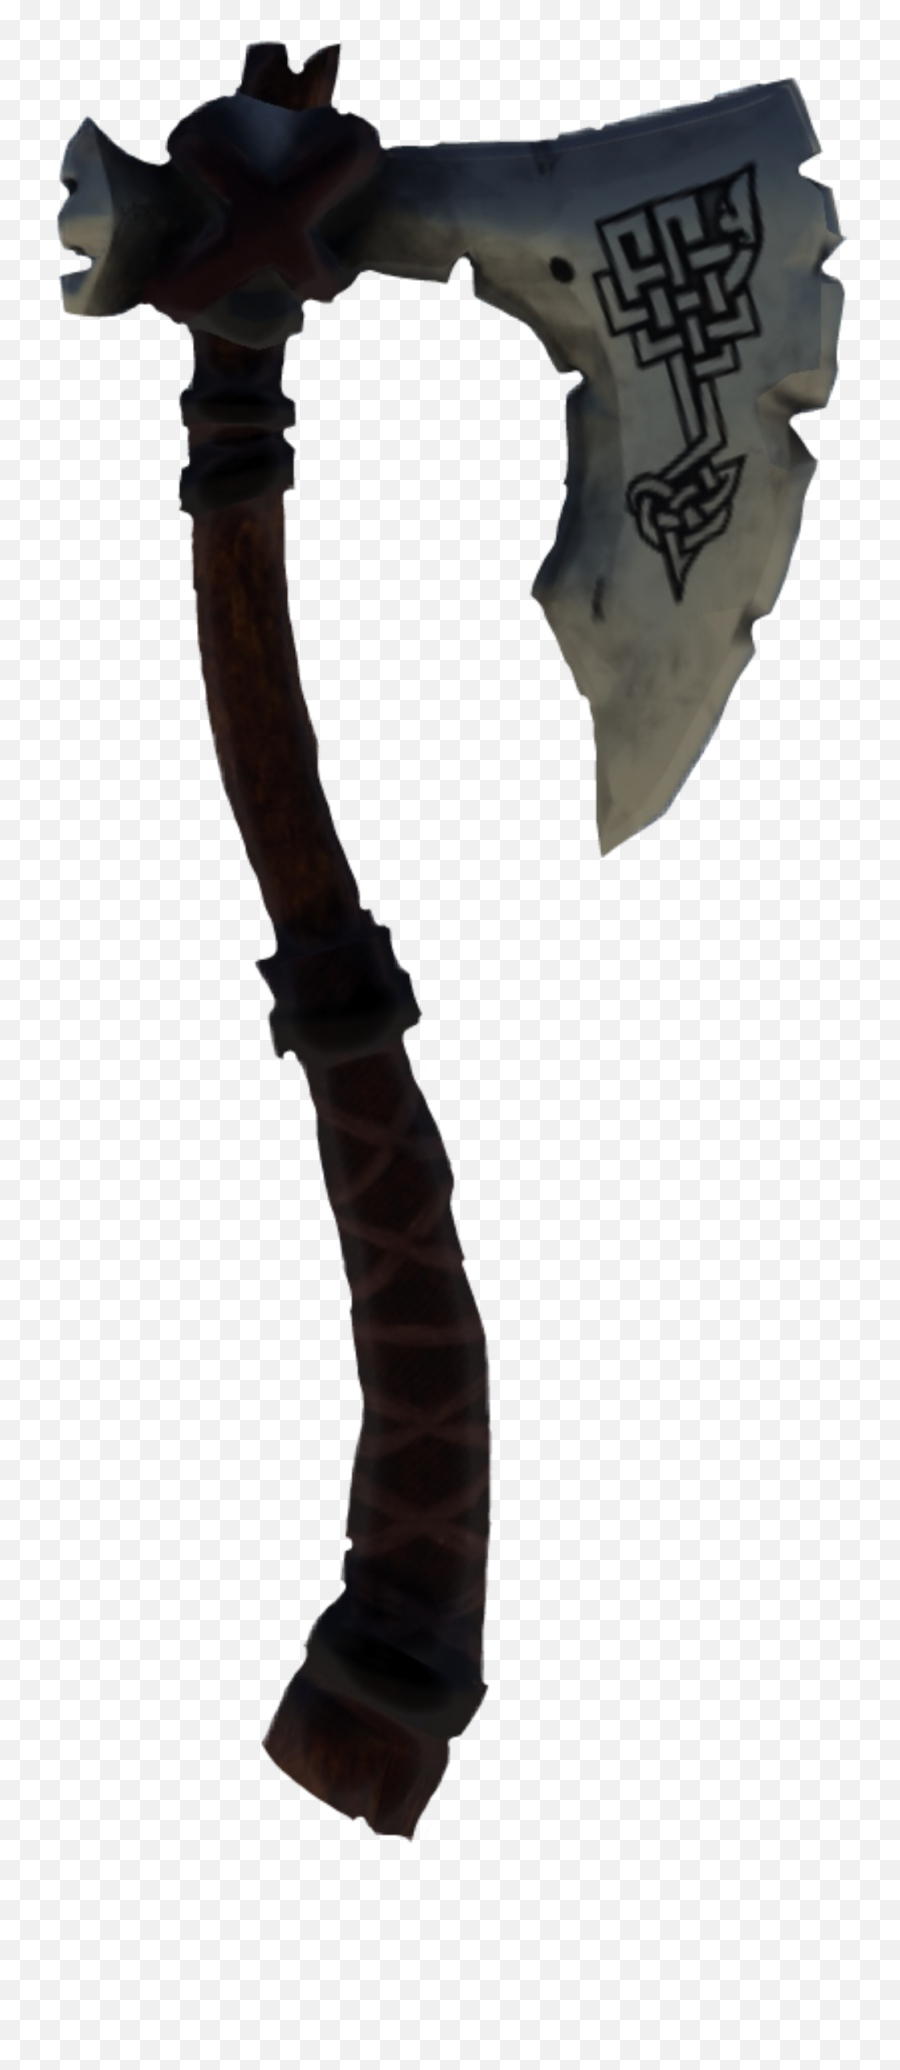 Axe Weapon Medieval Fantasy Sticker - Other Small Weapons Emoji,Axe Emoji